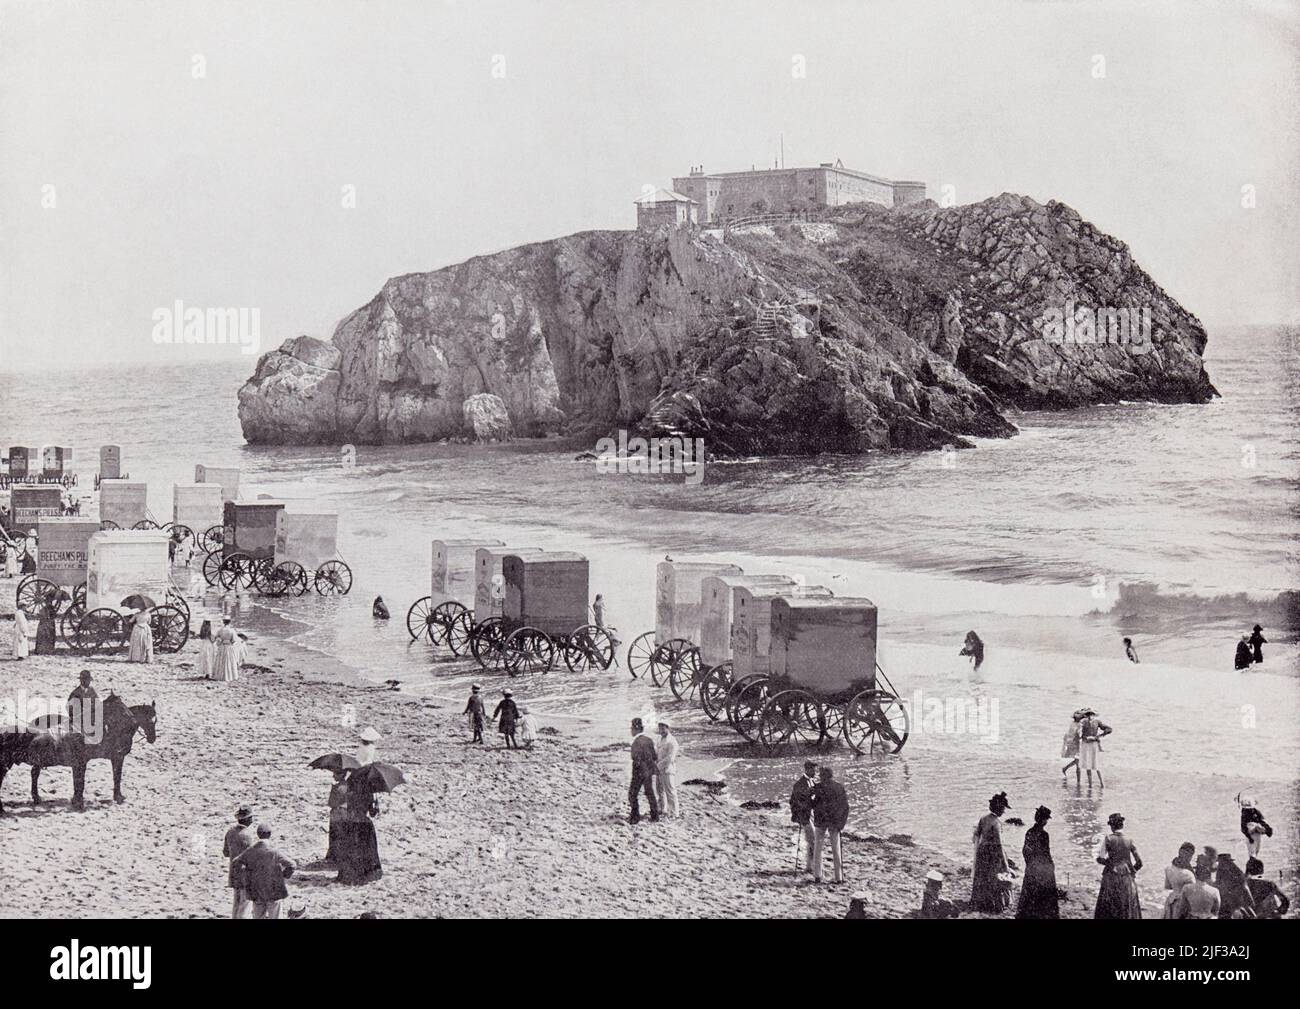 Tenby, Pembrokeshire, Wales.  St. Catherine's Rock and Fort, seen here in the 19th century.  From Around The Coast,  An Album of Pictures from Photographs of the Chief Seaside Places of Interest in Great Britain and Ireland published London, 1895, by George Newnes Limited. Stock Photo